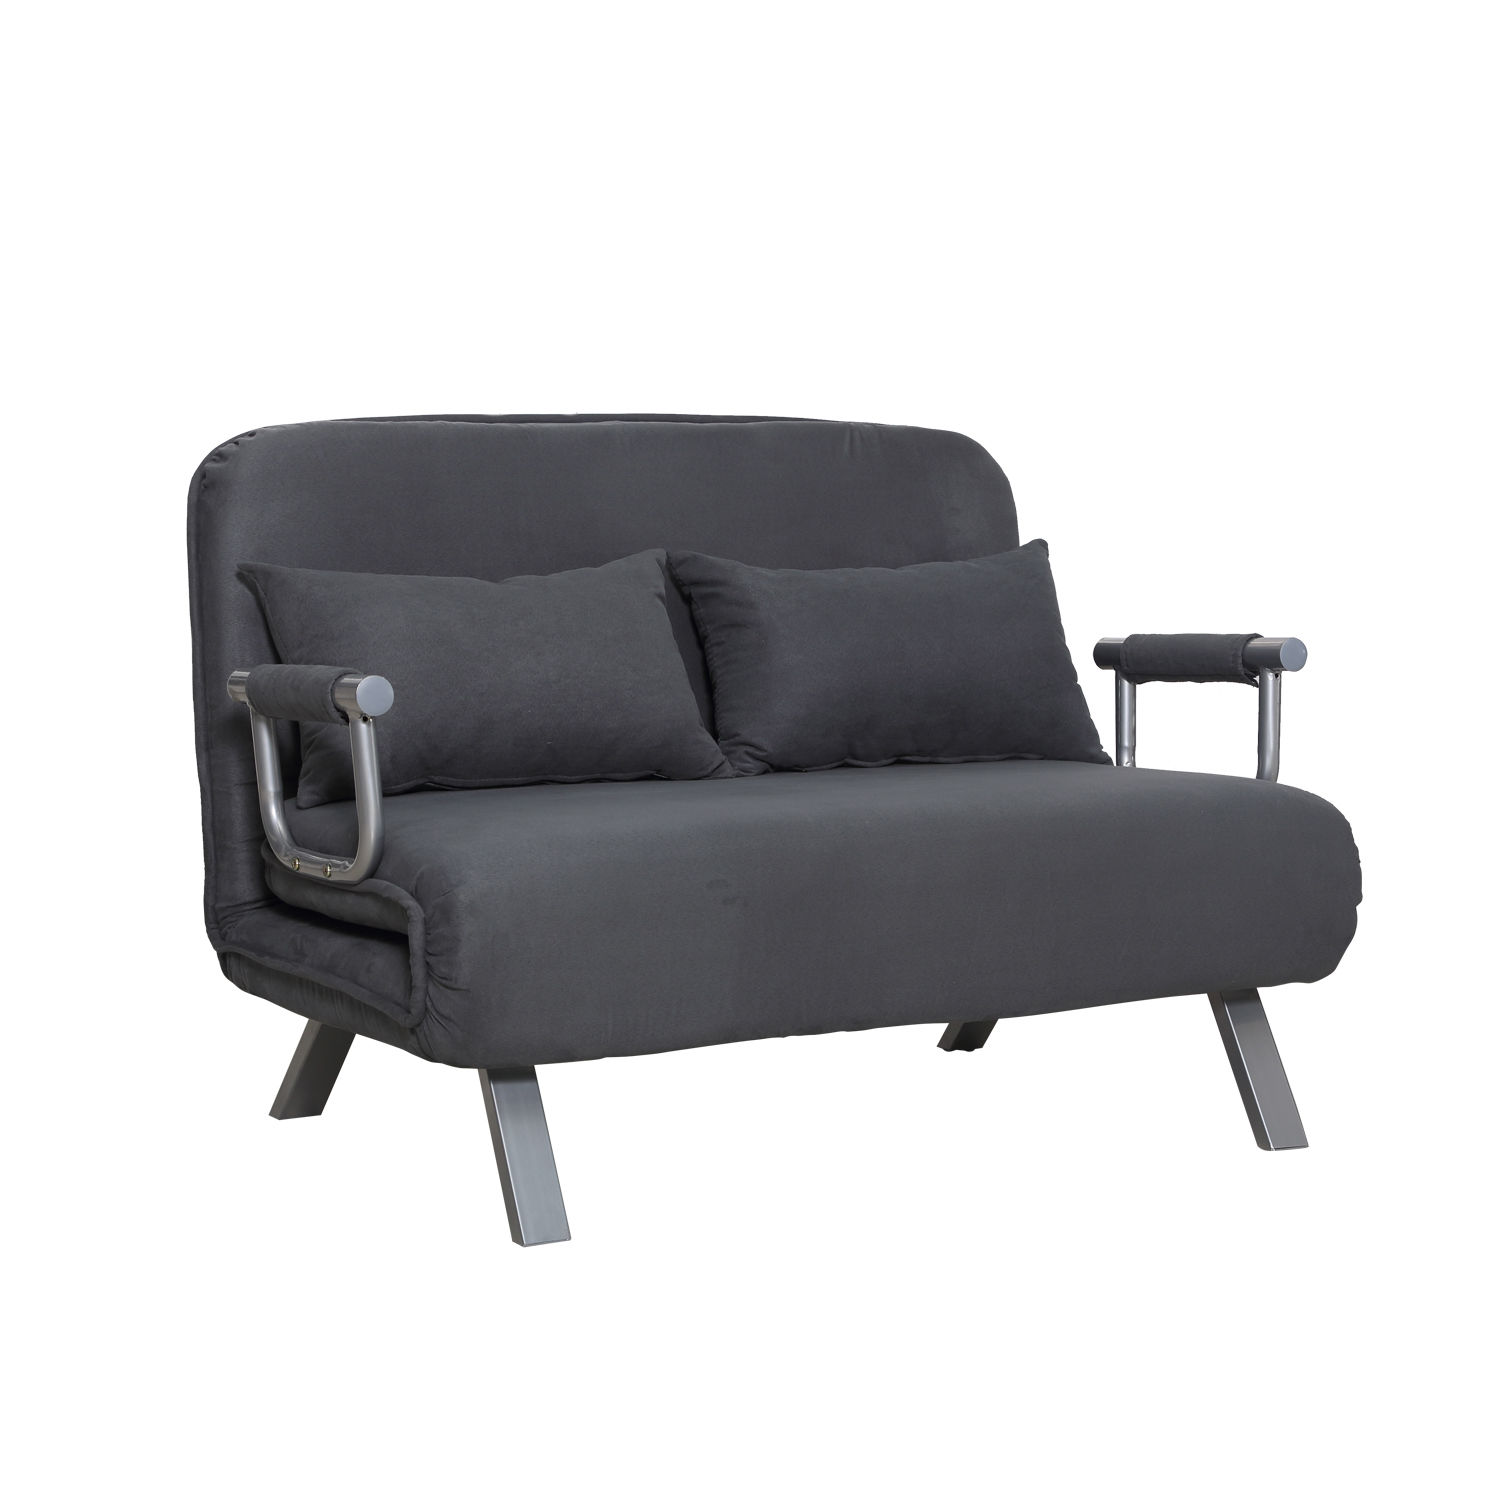 HomCom Small Sofa Couch Futon with Fold Up Bed and Adjustable Backrest, featuring Modern Design with Chic Suede, Grey - image 1 of 10